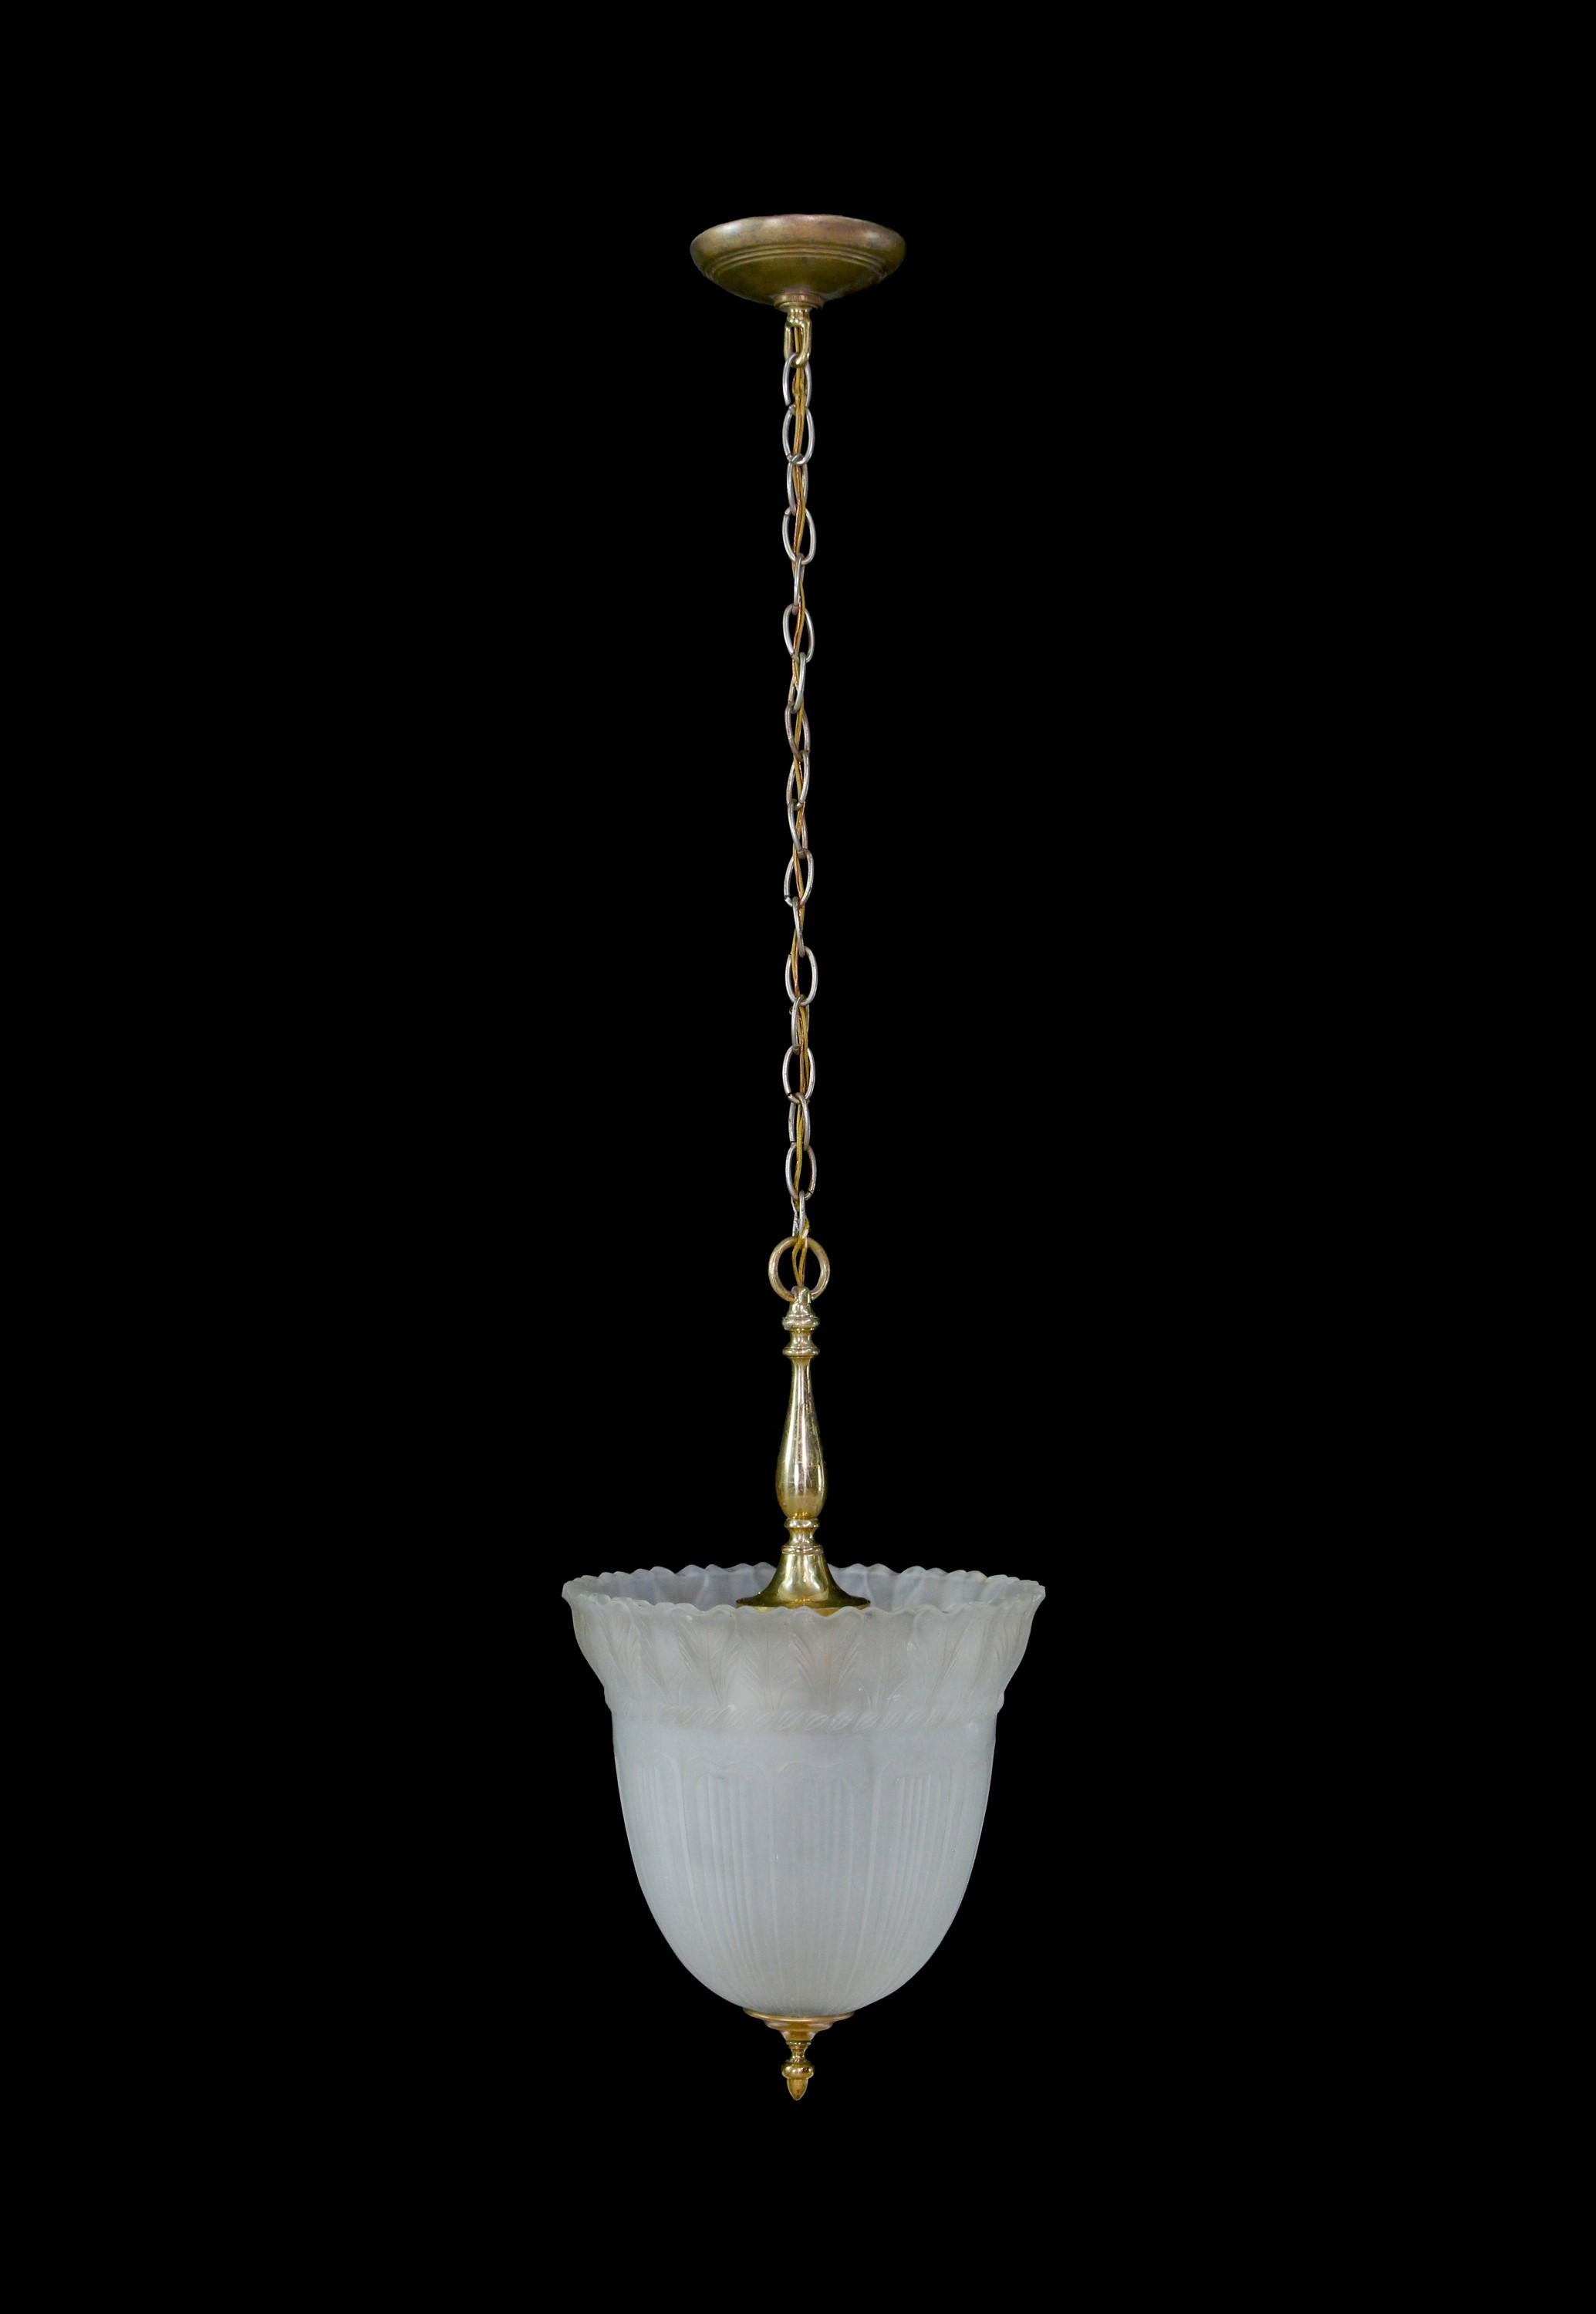 1890s antique embossed frosted glass shade mated to solid brass lighting hardware. Three medium base socket hub in center. Due to age minor staining on glass. Please see photos. Excellent choice for a vestibule or foyer. This can be seen at our 400